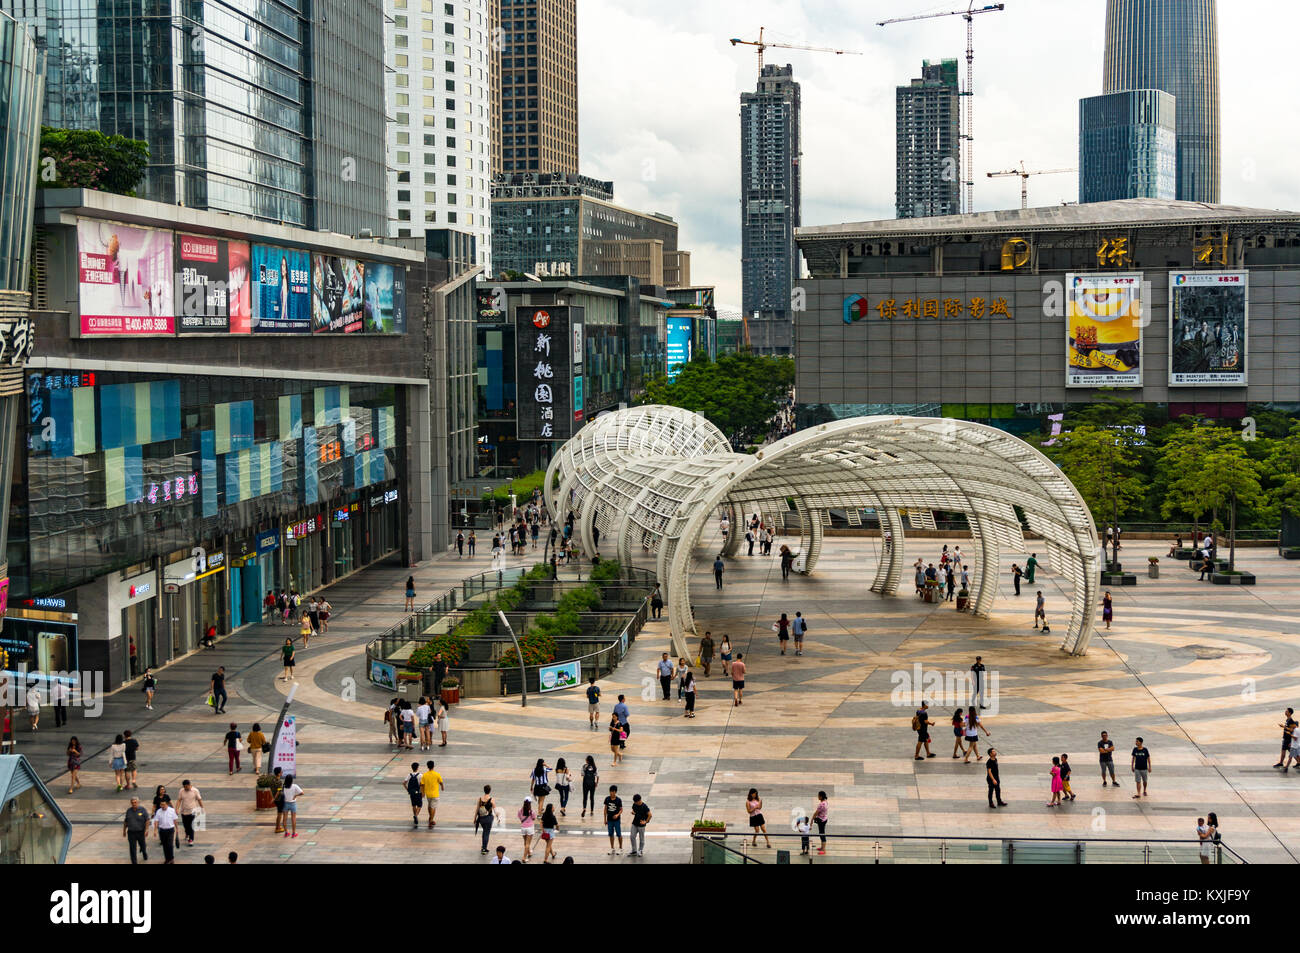 Shenzhen cultural shopping district (Haide Square) in Houhai area of Shenzhen, China Stock Photo